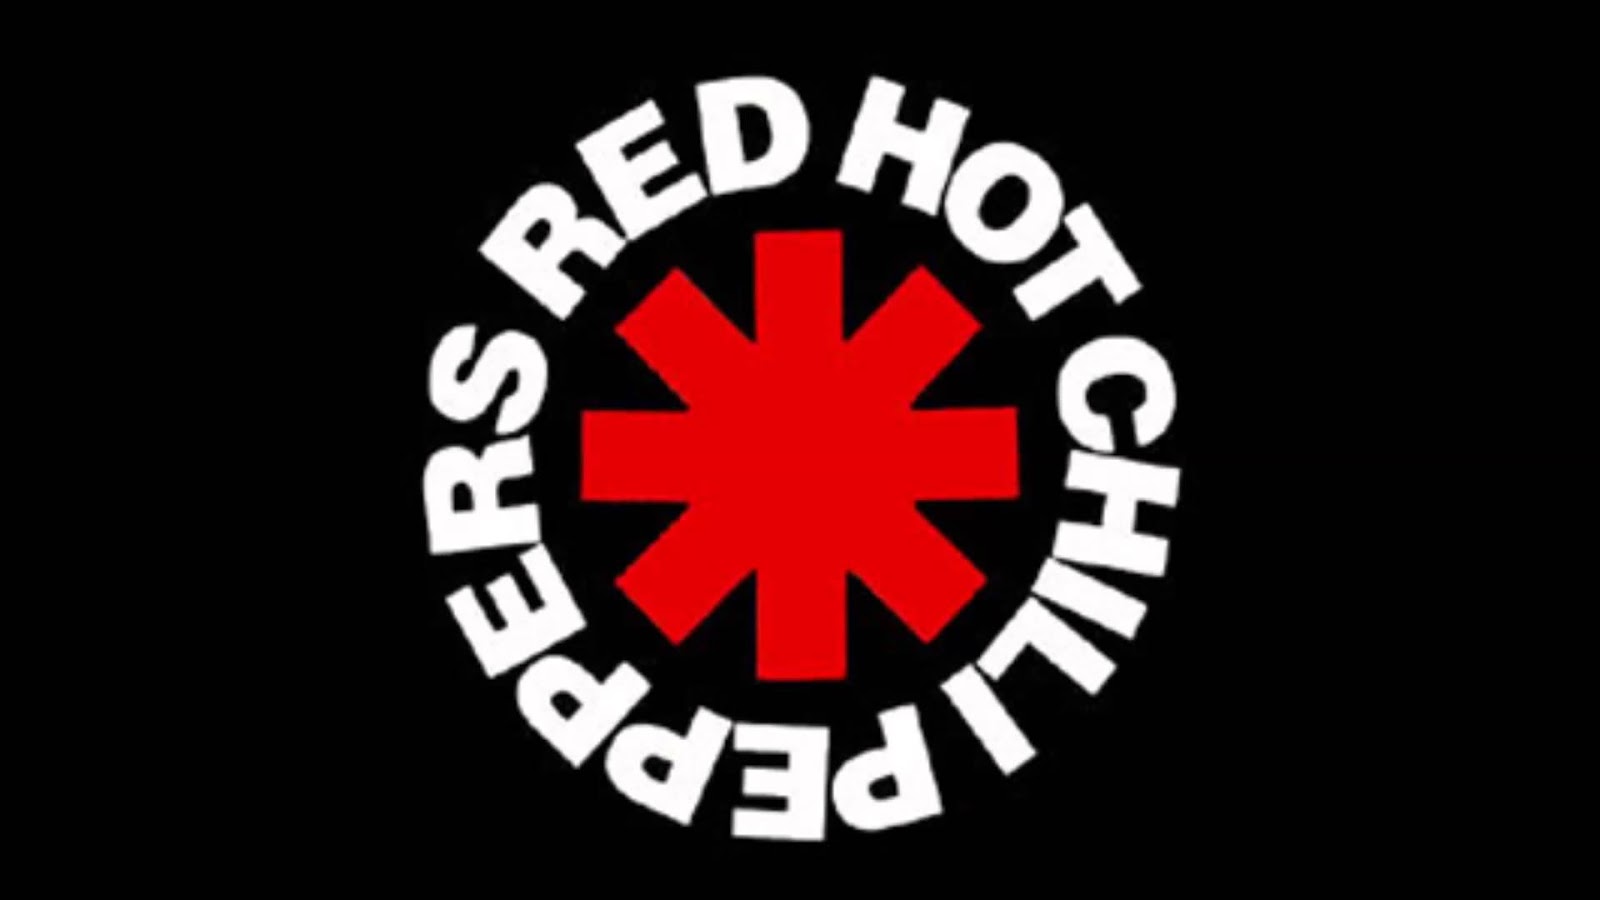 Welcome Sejarah Red Hot Chille Peppers